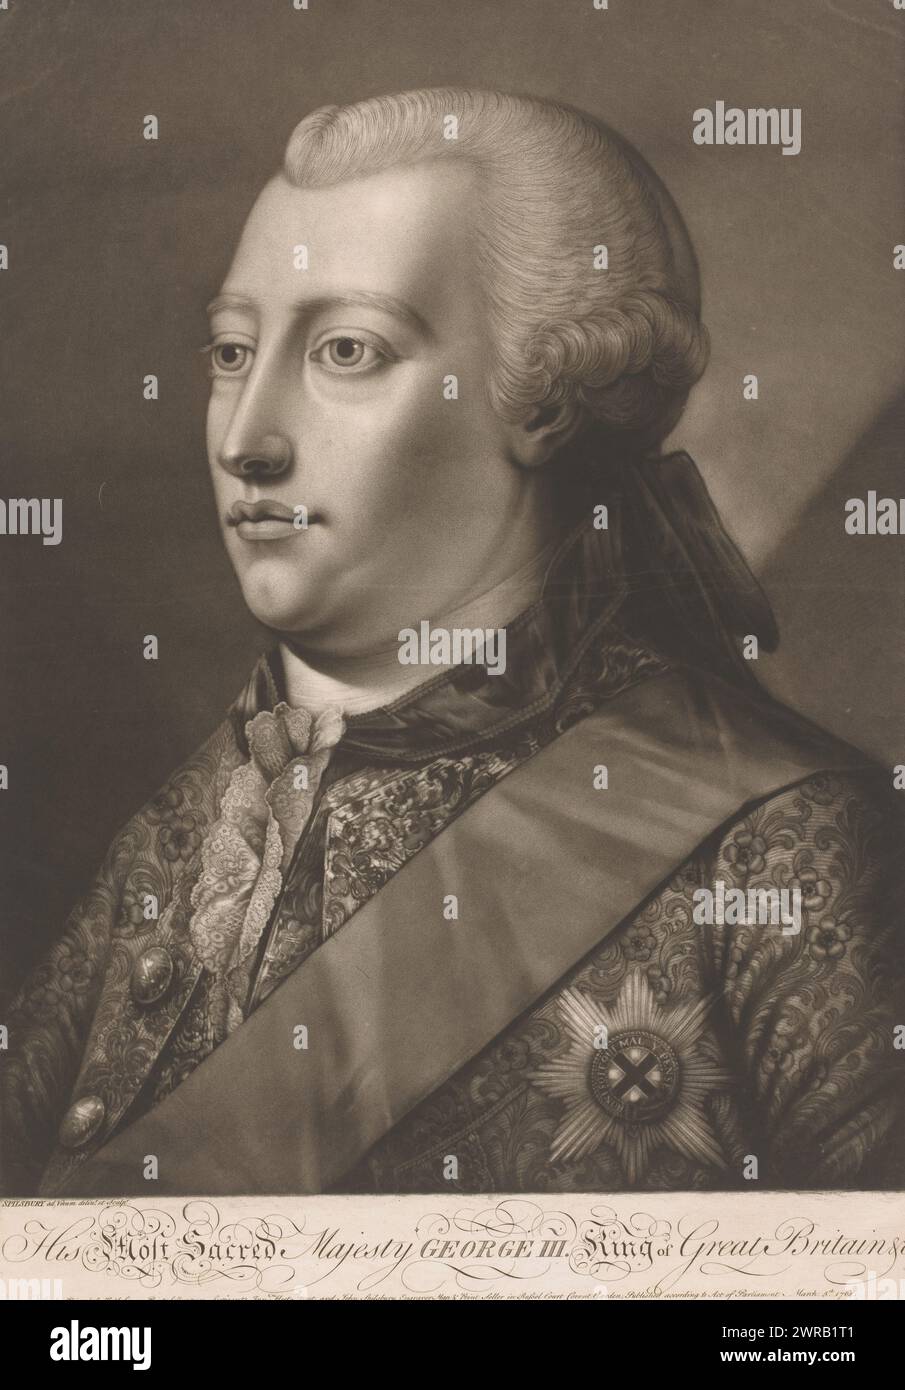 Portrait of George III of the United Kingdom, His Most Sacred Majesty George III King of Great Britain &c. (title on object), print maker: Jonathan Spilsbury, after own design by: Jonathan Spilsbury, publisher: Robert Sayer, London, Mar-1764, paper, height 503 mm × width 352 mm, print Stock Photo